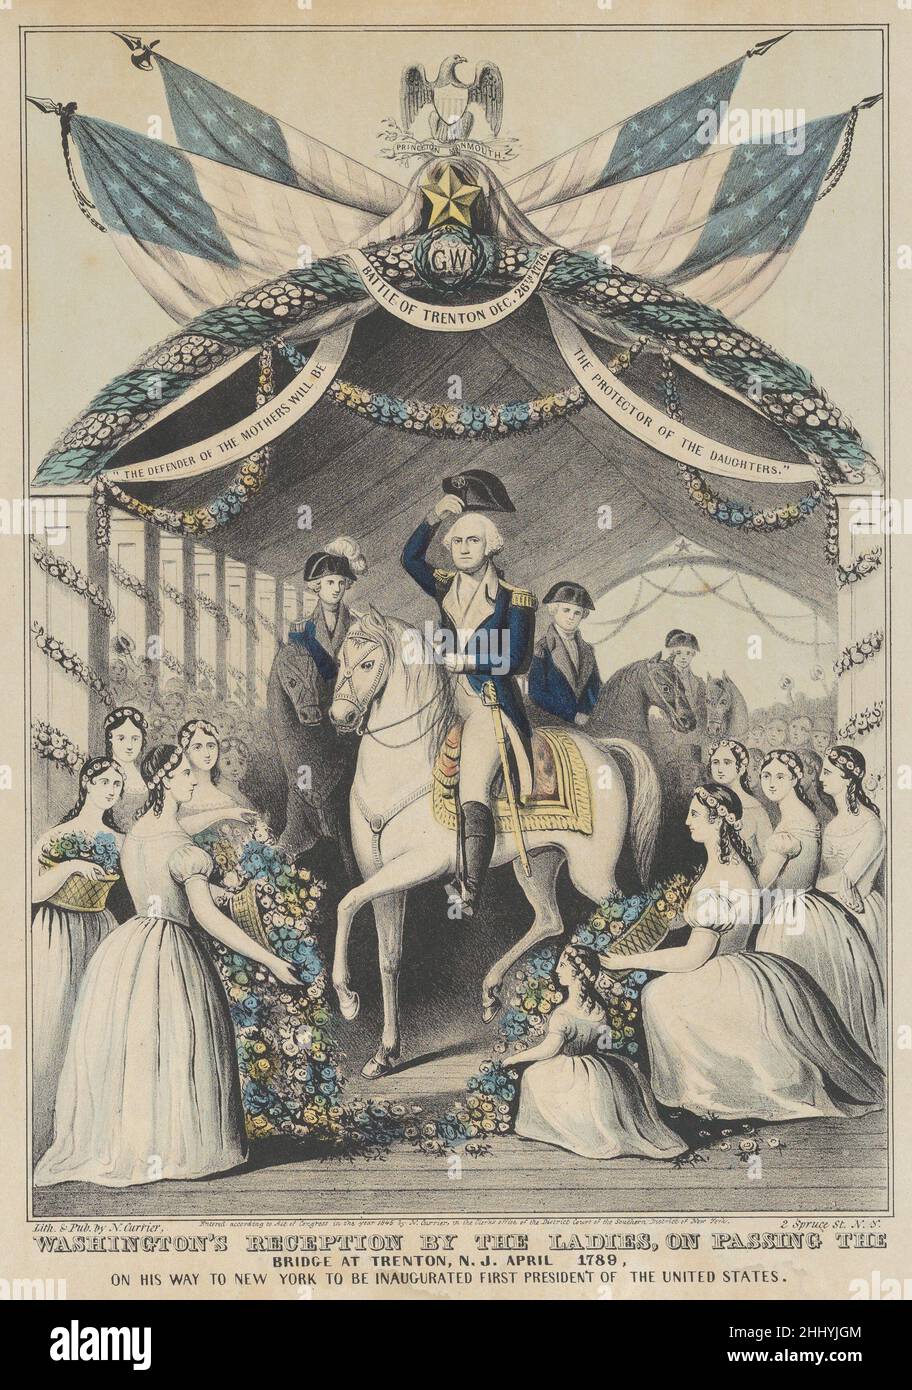 Washington's Reception by the Ladies on Passing the Bridge at Trenton, N.J., April 1789, on His Way to be Inaugurated First President of the United States 1845 Lithographed and published by Nathaniel Currier American George Washington on horseback, accompanied by other gentlemen, is greeted by ladies bearing flowers as he rides over the bridge at Trenton. Banners bear the following inscriptions: 'Battle of Trenton, December 26, 1776' 'The Defender of the Mothers will be the Proctector of the Daughters.'. Washington's Reception by the Ladies on Passing the Bridge at Trenton, N.J., April 1789, o Stock Photo